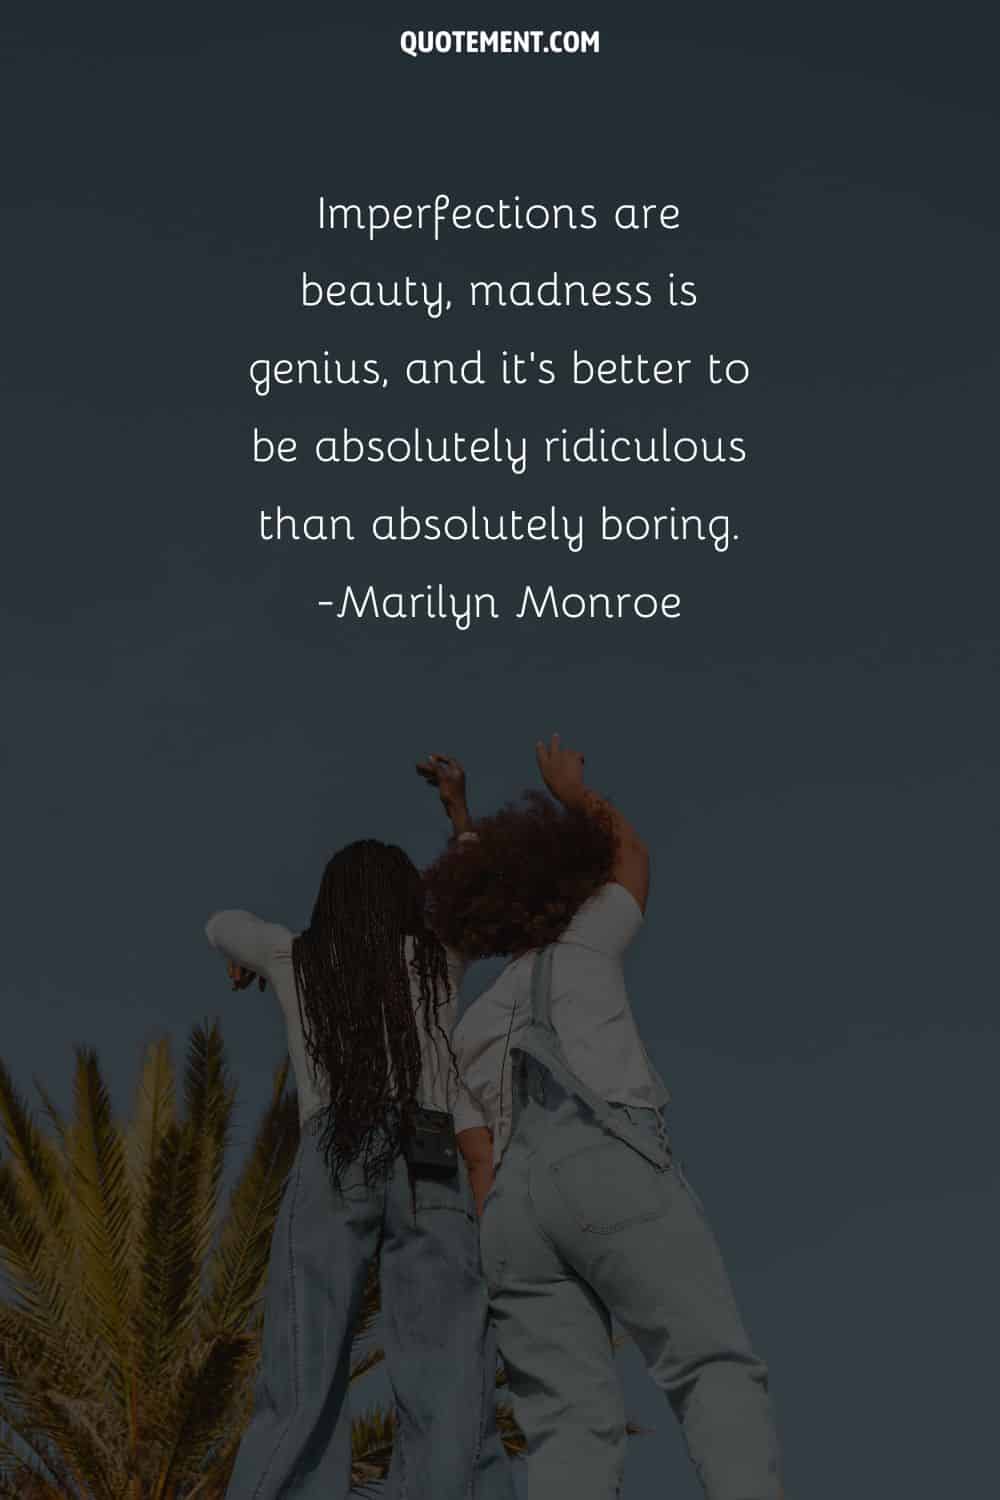 Imperfections are beauty, madness is genius, and it’s better to be absolutely ridiculous than absolutely boring